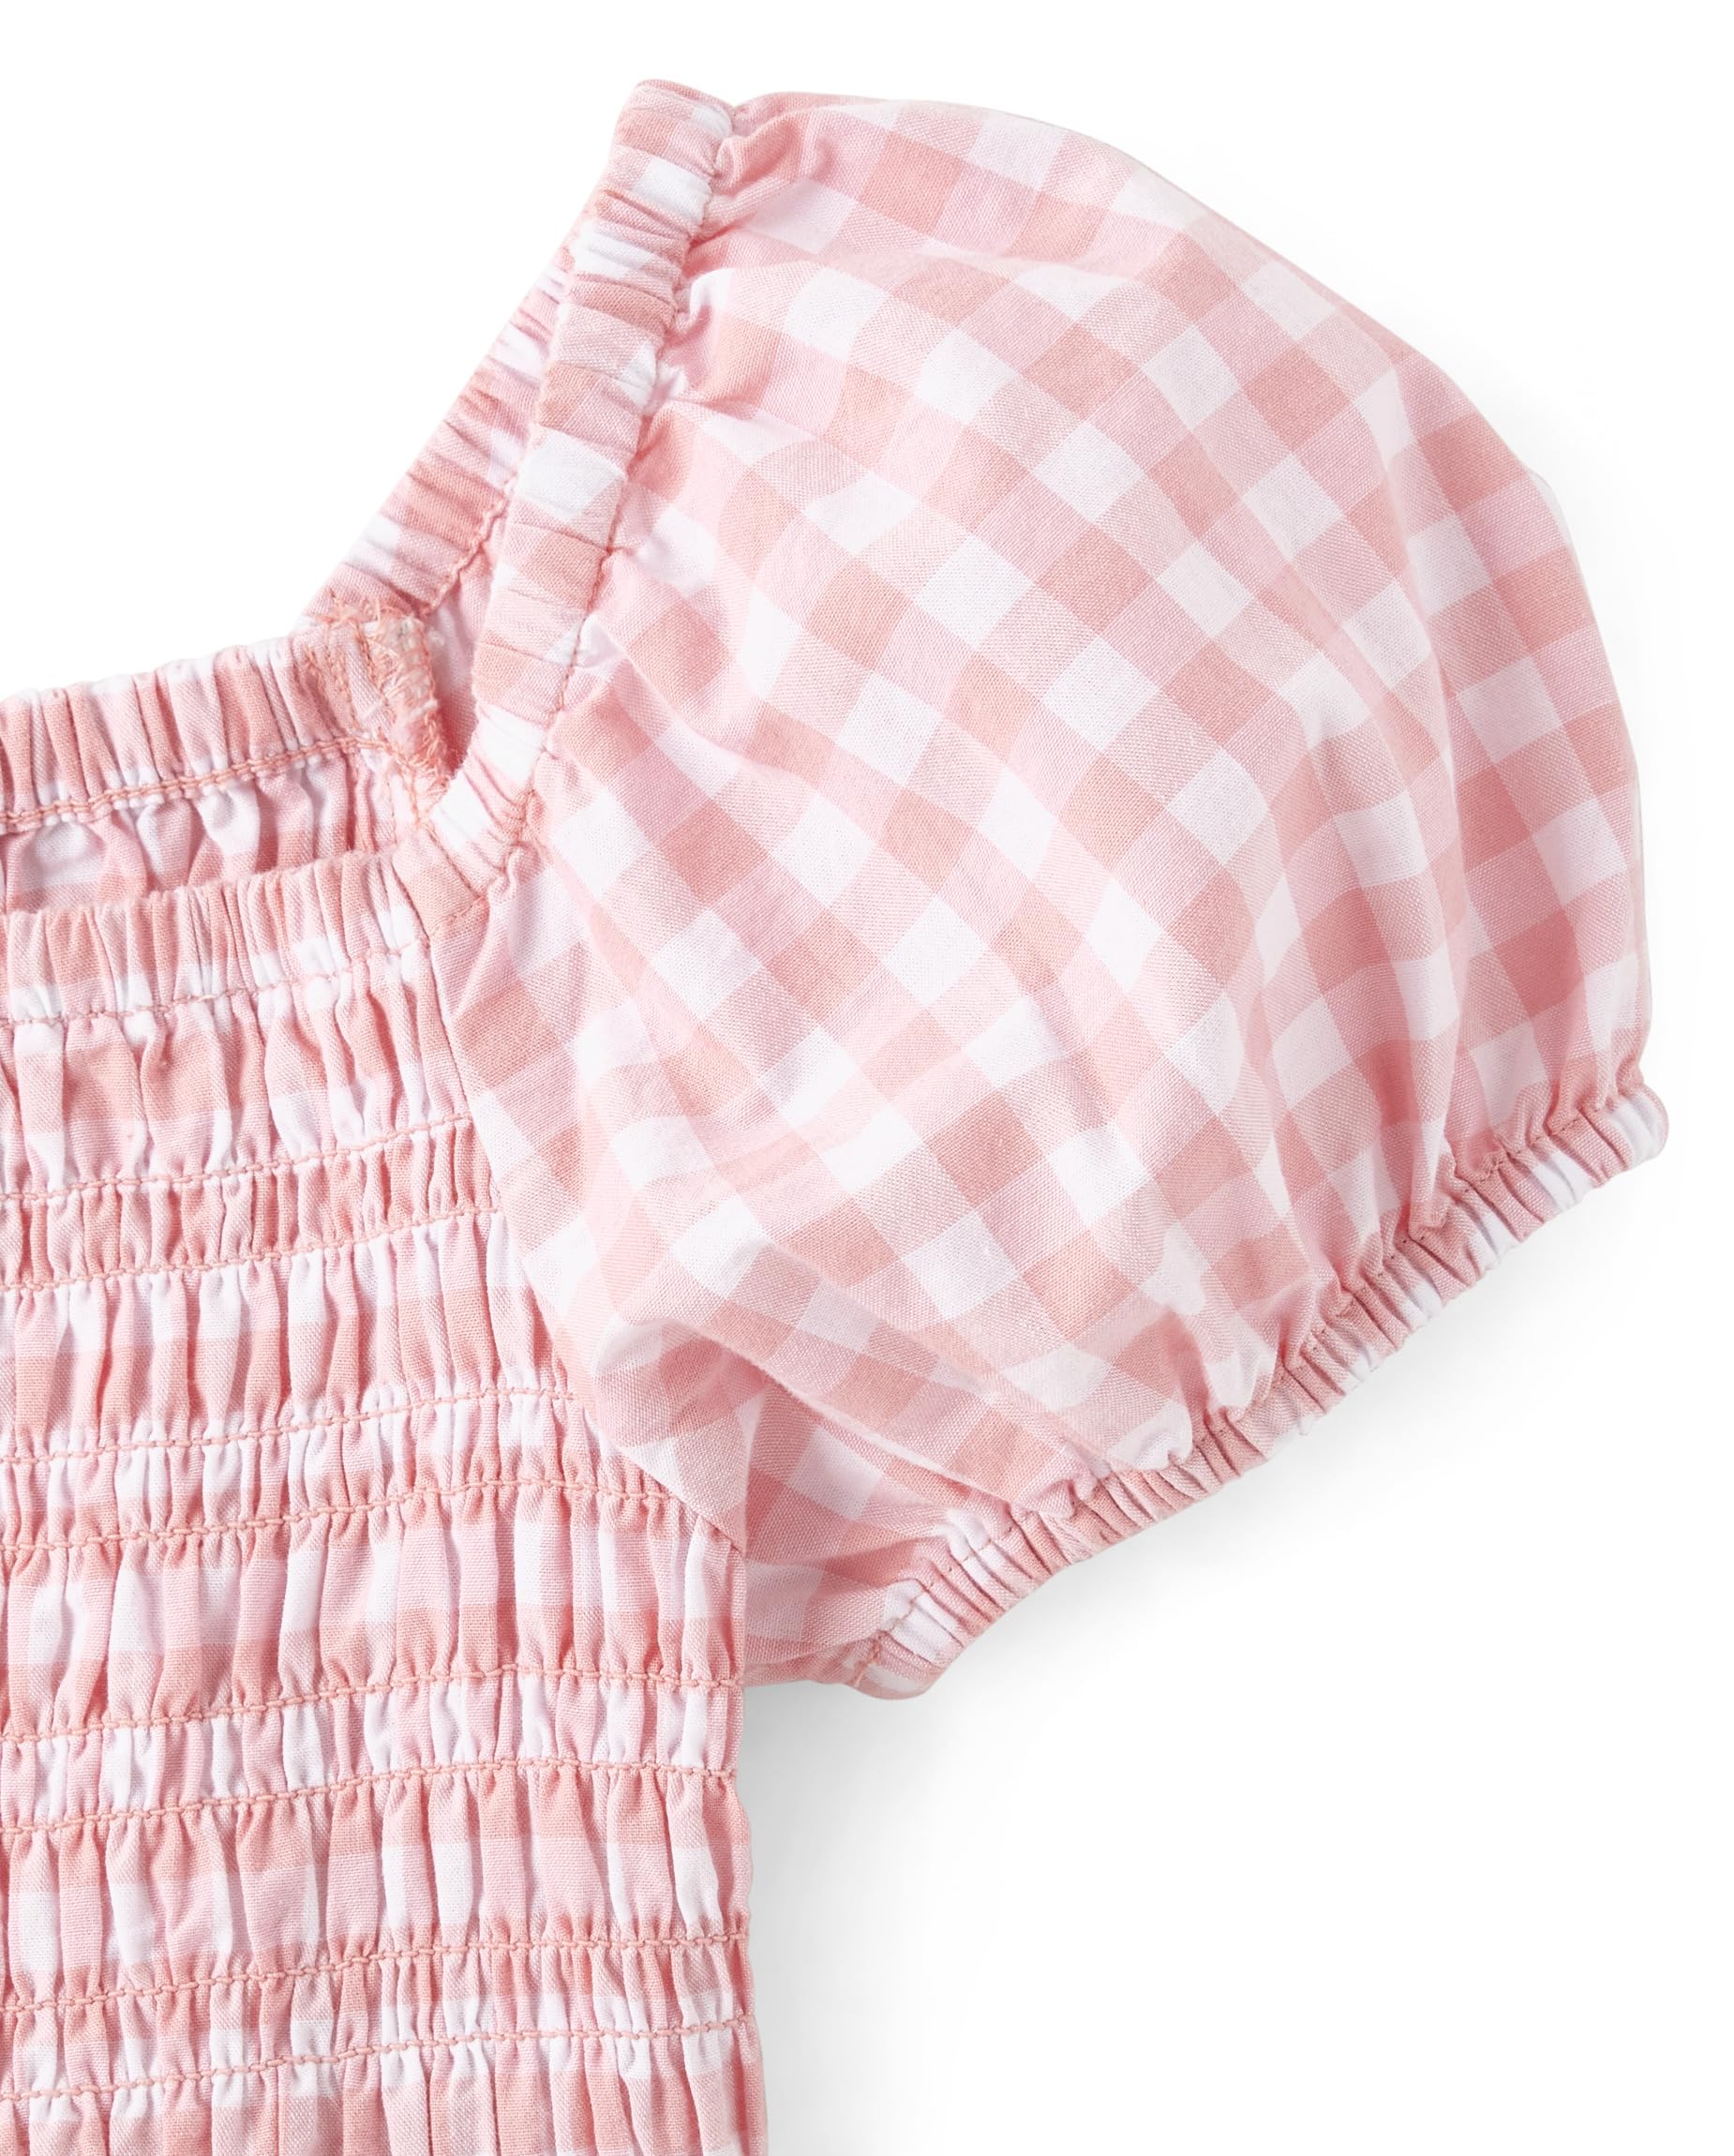 The Children's Place Baby Girls' Short Dressy Special Occasion Dresses, Pink Gingham Puff Sleeve, Medium